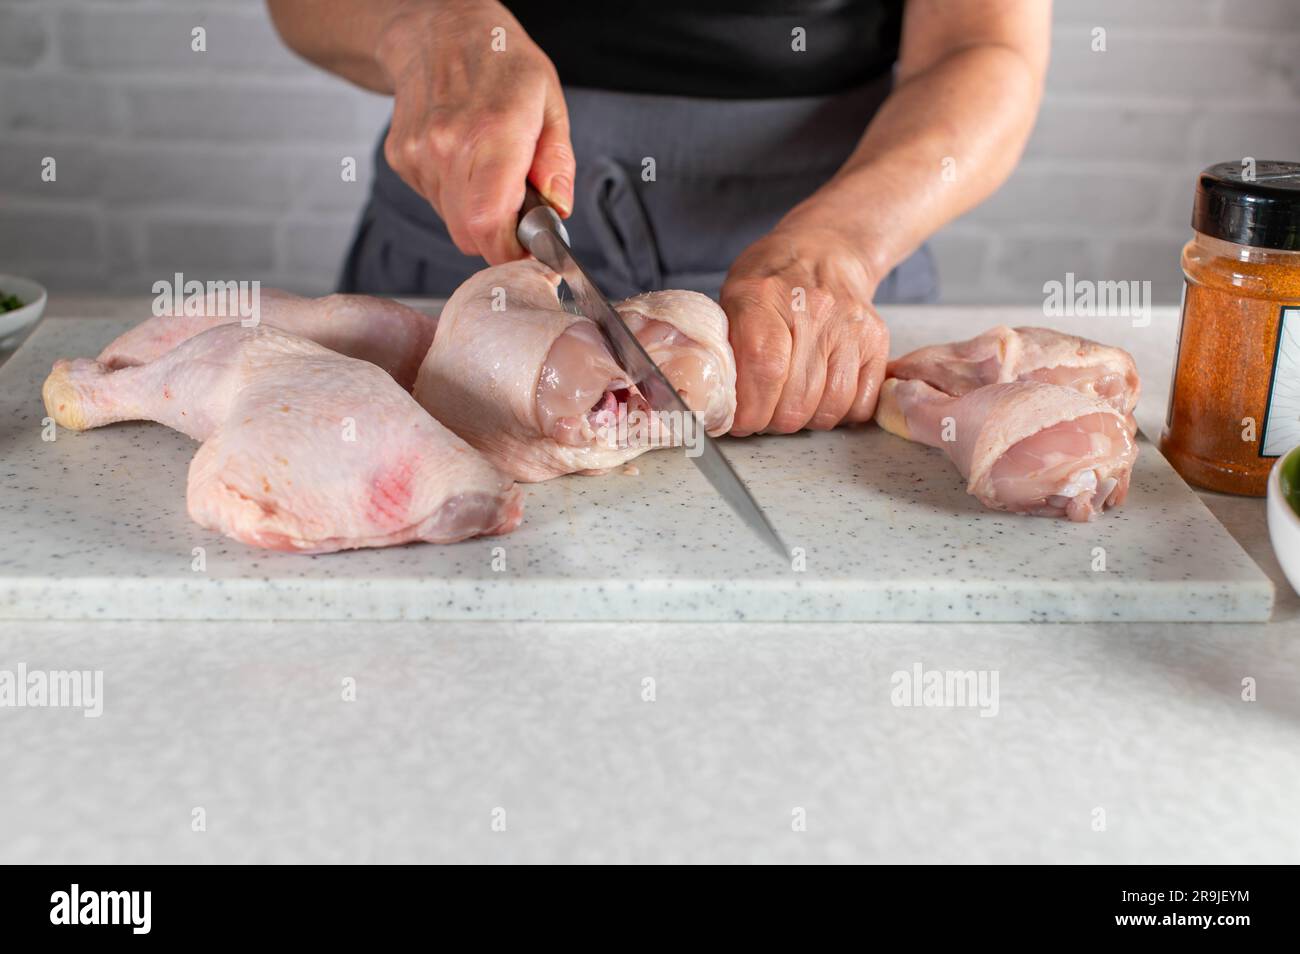 Cutting or carving raw chicken leg into shank and drumstick. Part of a series Stock Photo